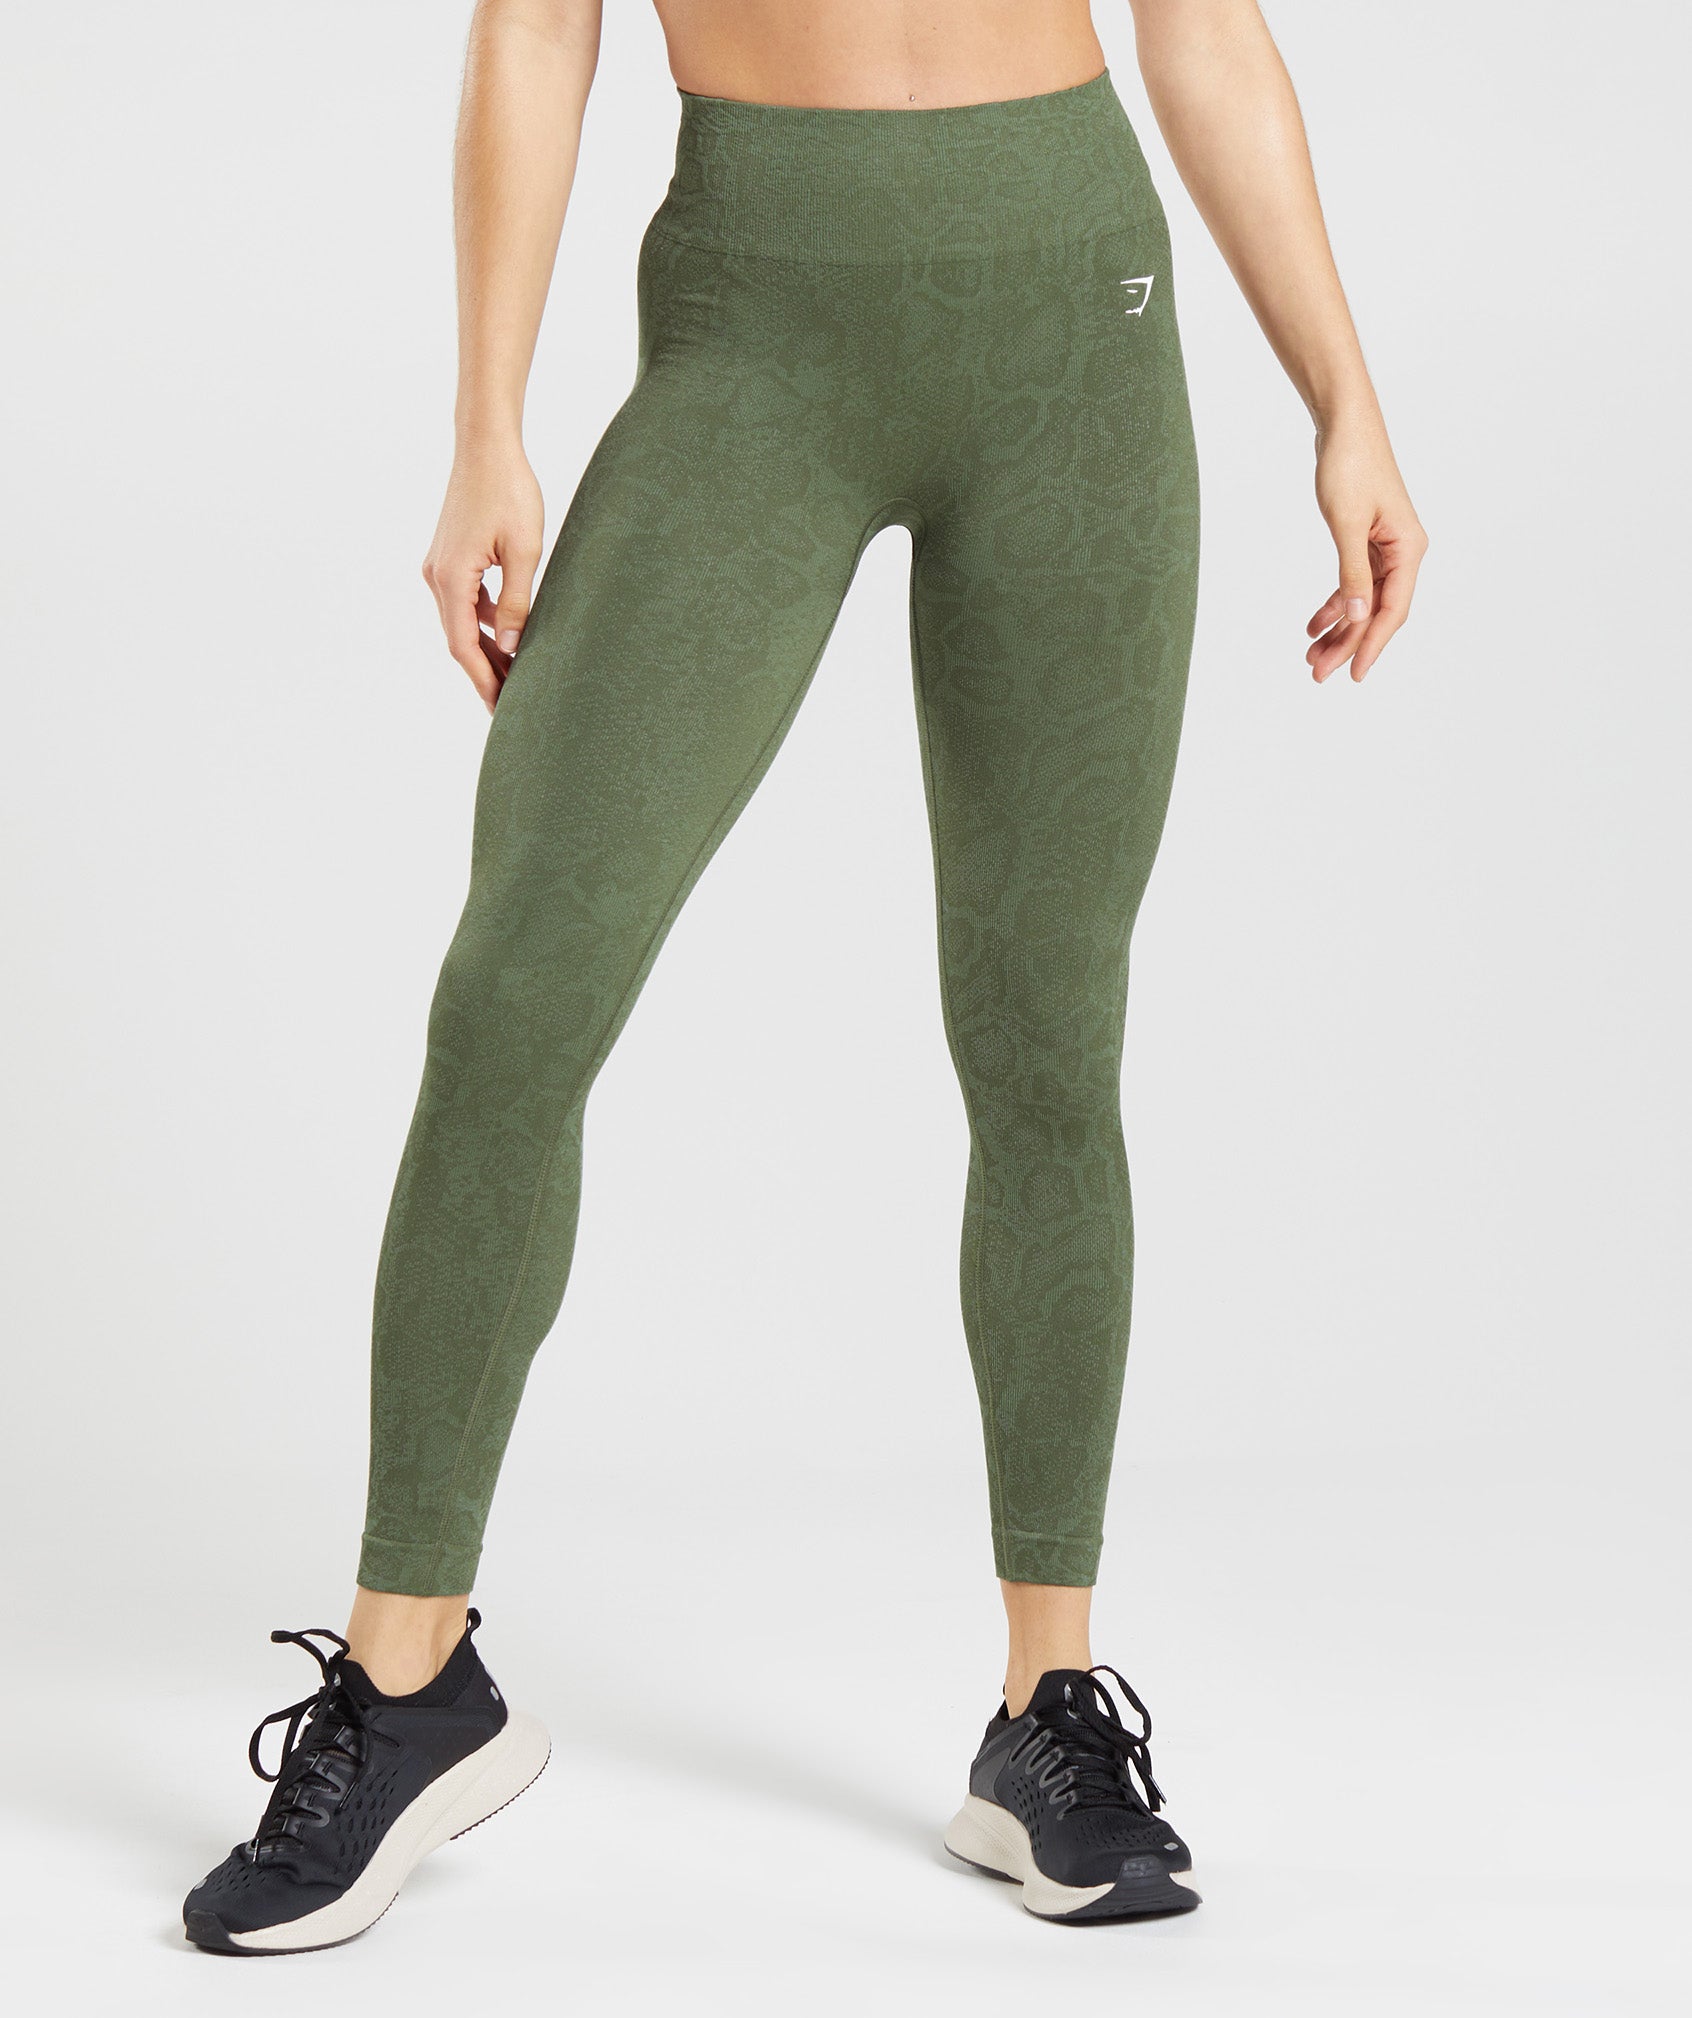 Adapt Animal Seamless Leggings in Willow Green/Core Olive - view 1